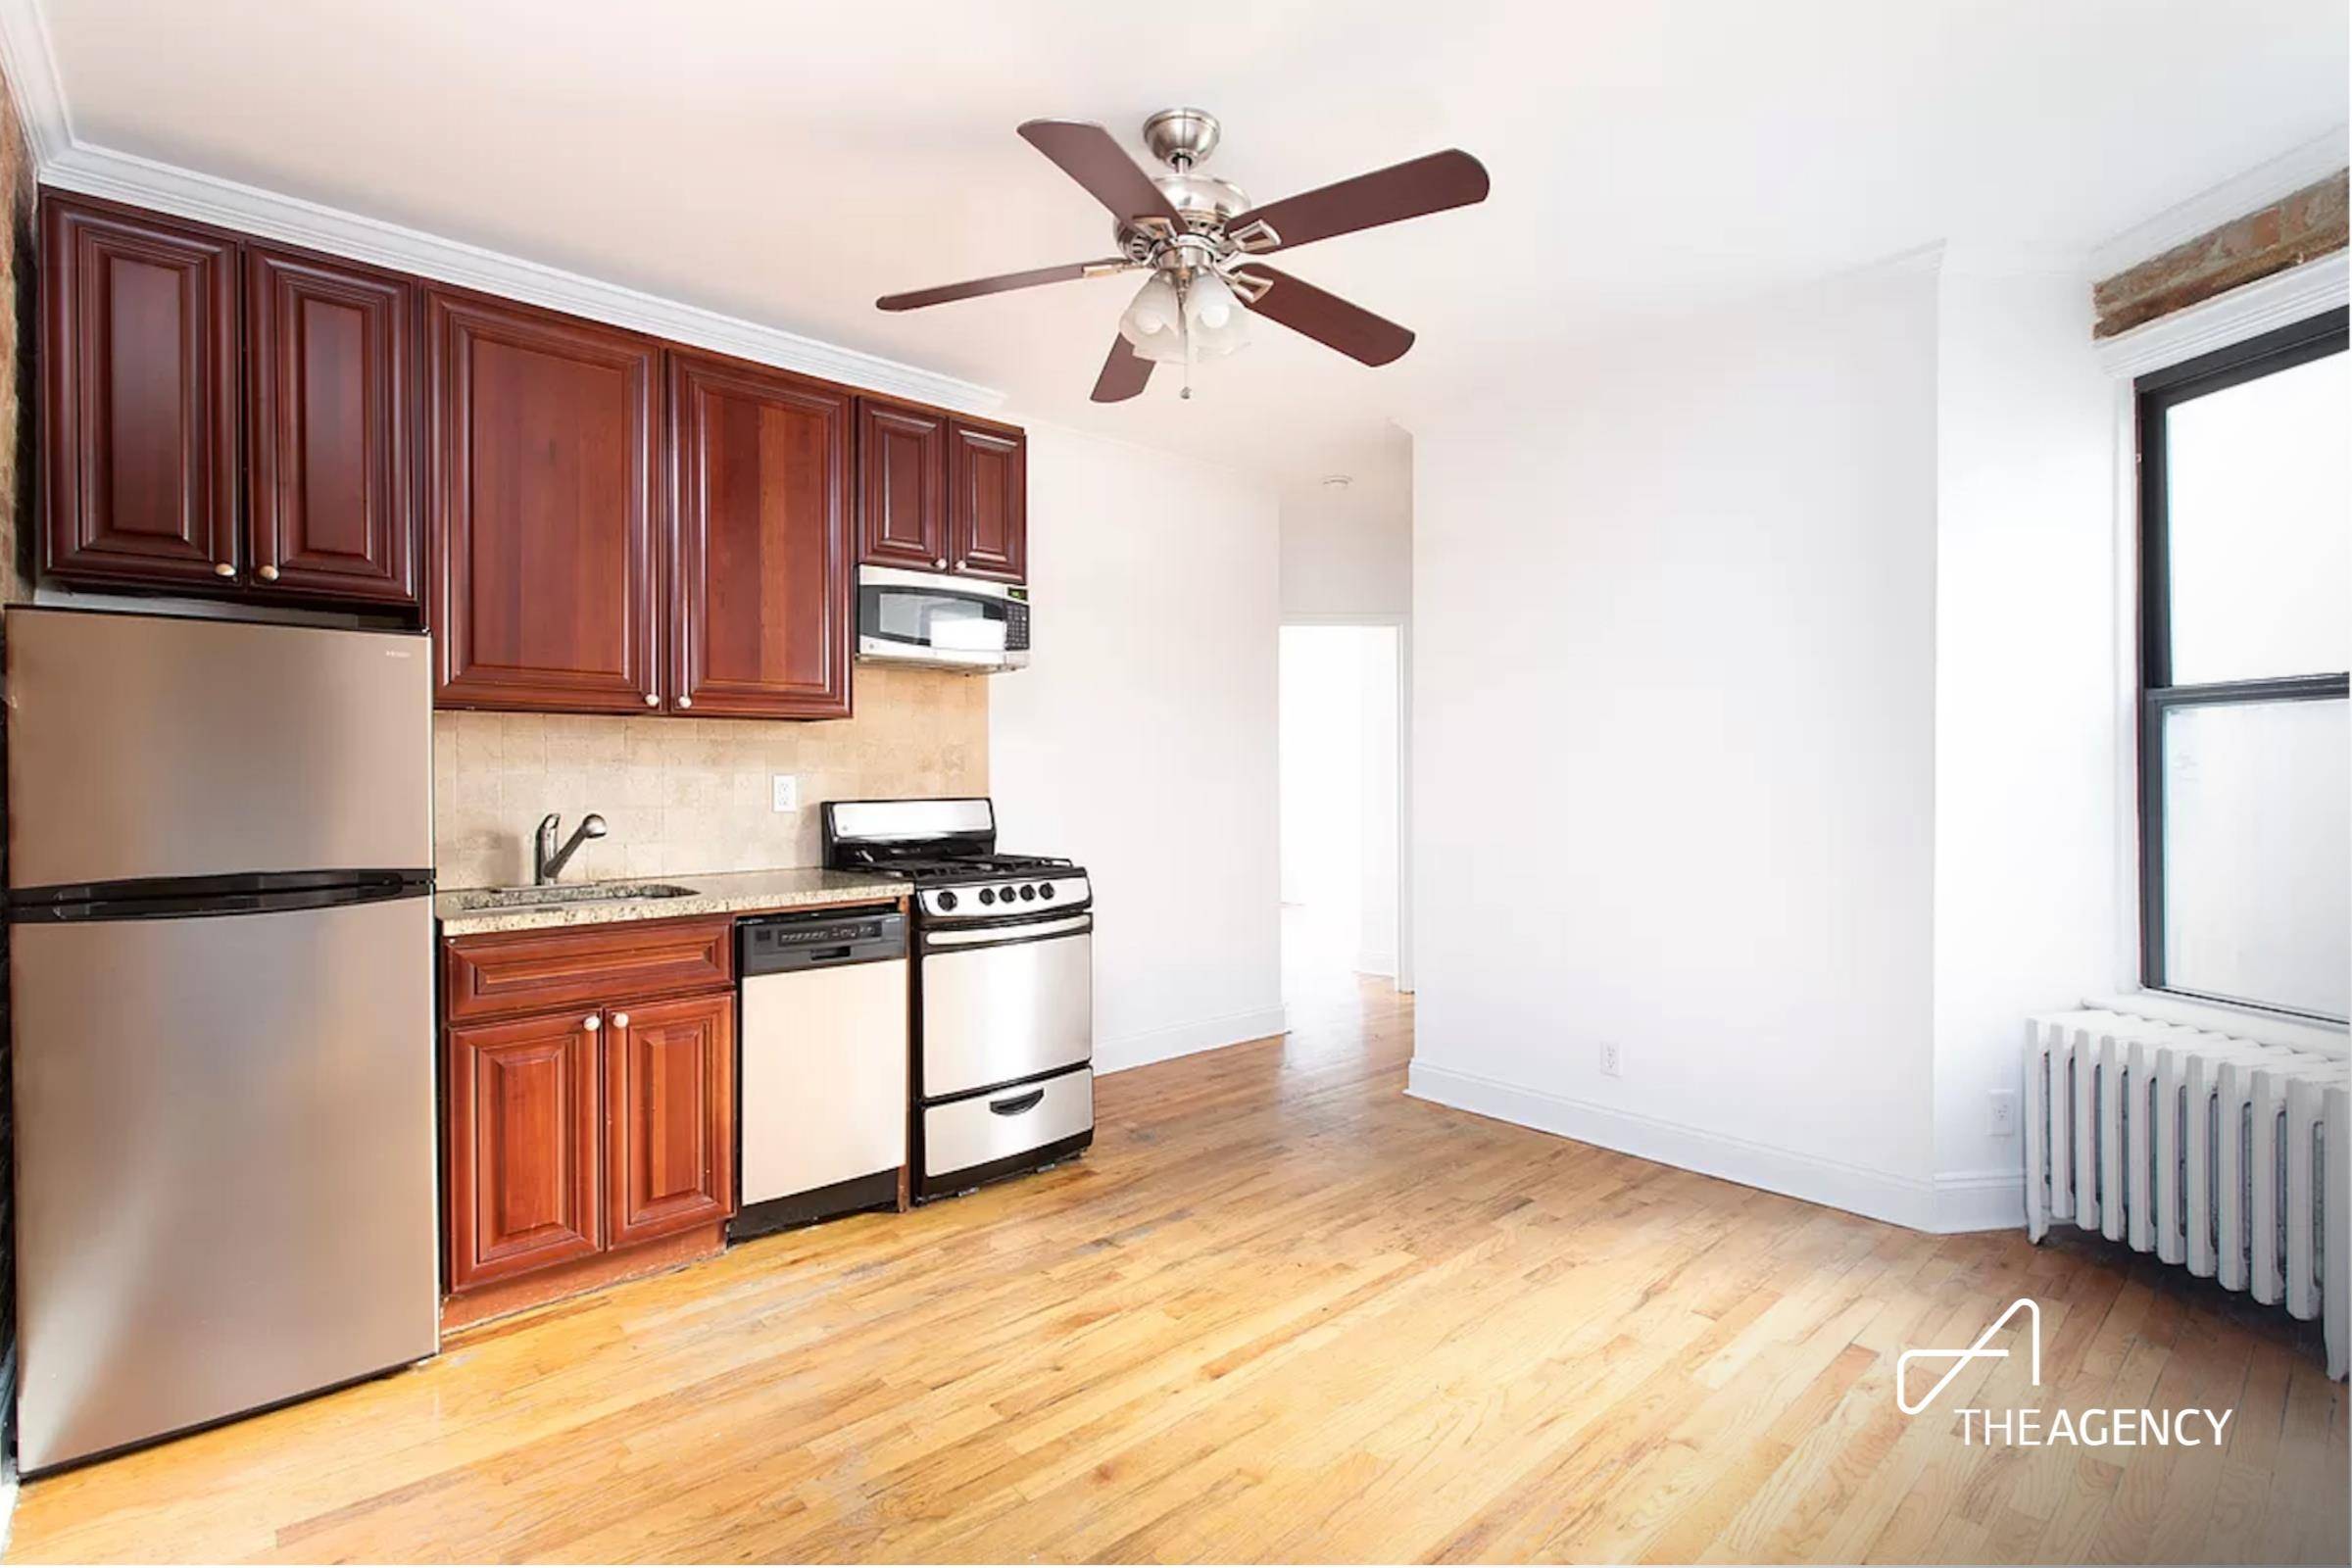 6th floor walk upFeatures amp ; Amenities Spacious Living Room Stainless Steel Appliances Exposed Brick Virtual Doorman1 Av Station and the East 20th St Ferry are only a few minutes ...